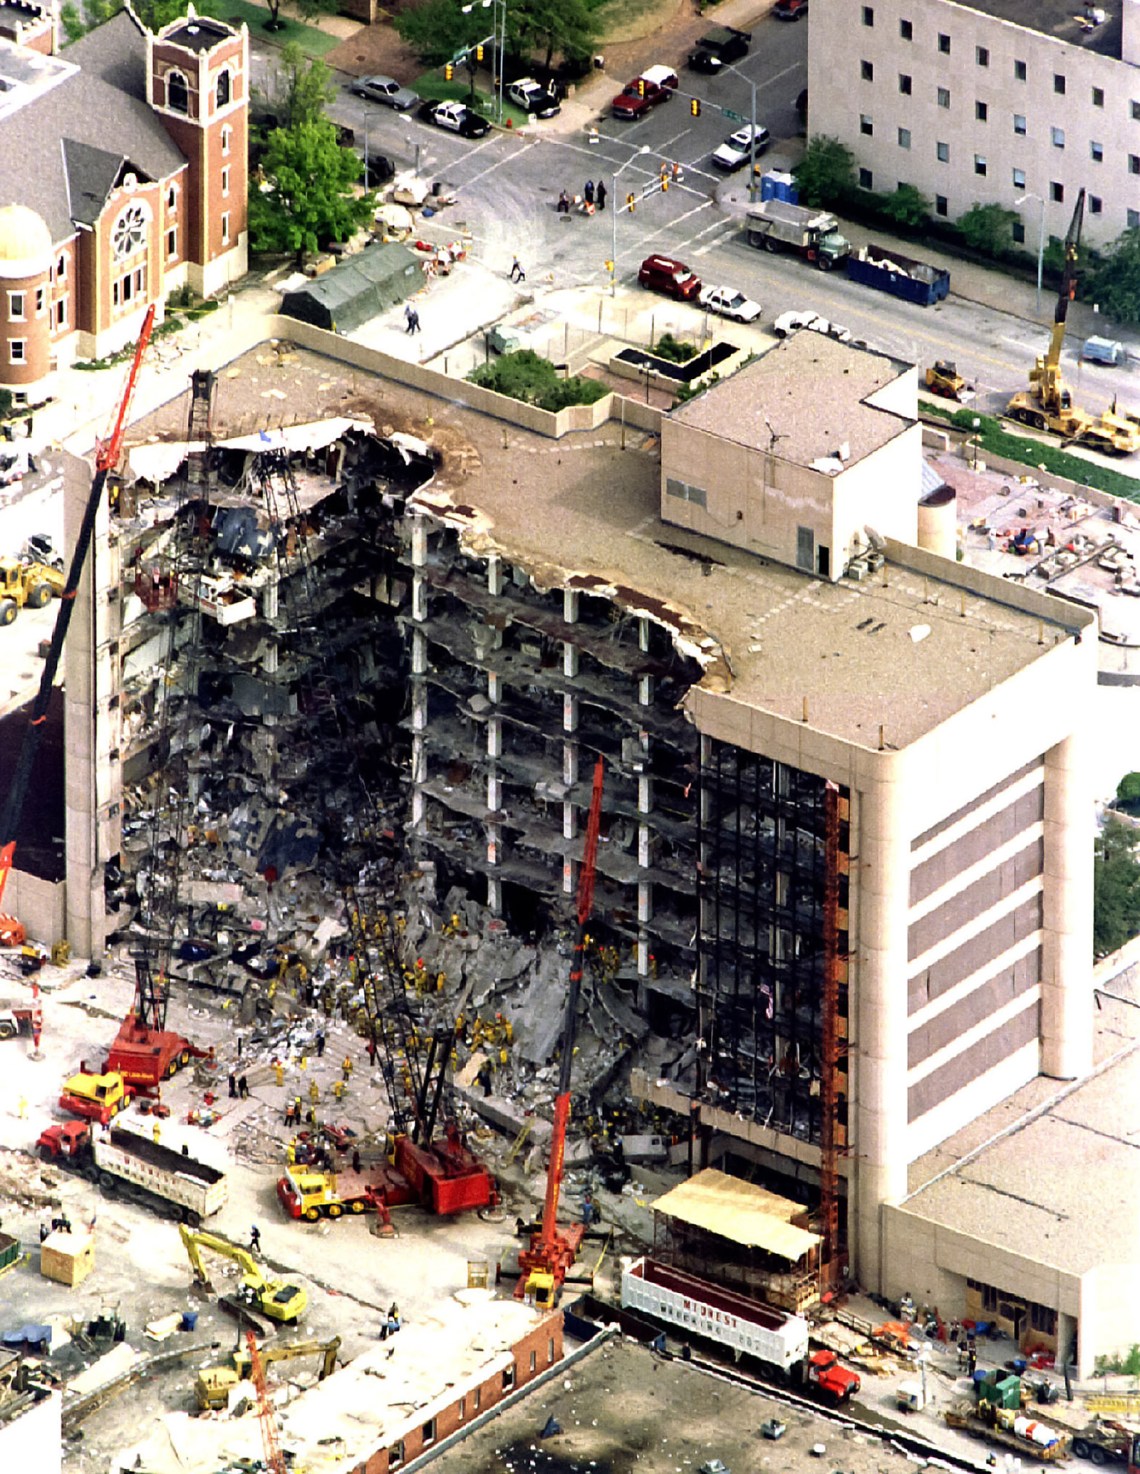 Alfred P. Murrah Federal Building after Timothy McVeigh detonated a truck packed with explosives, Oklahoma City